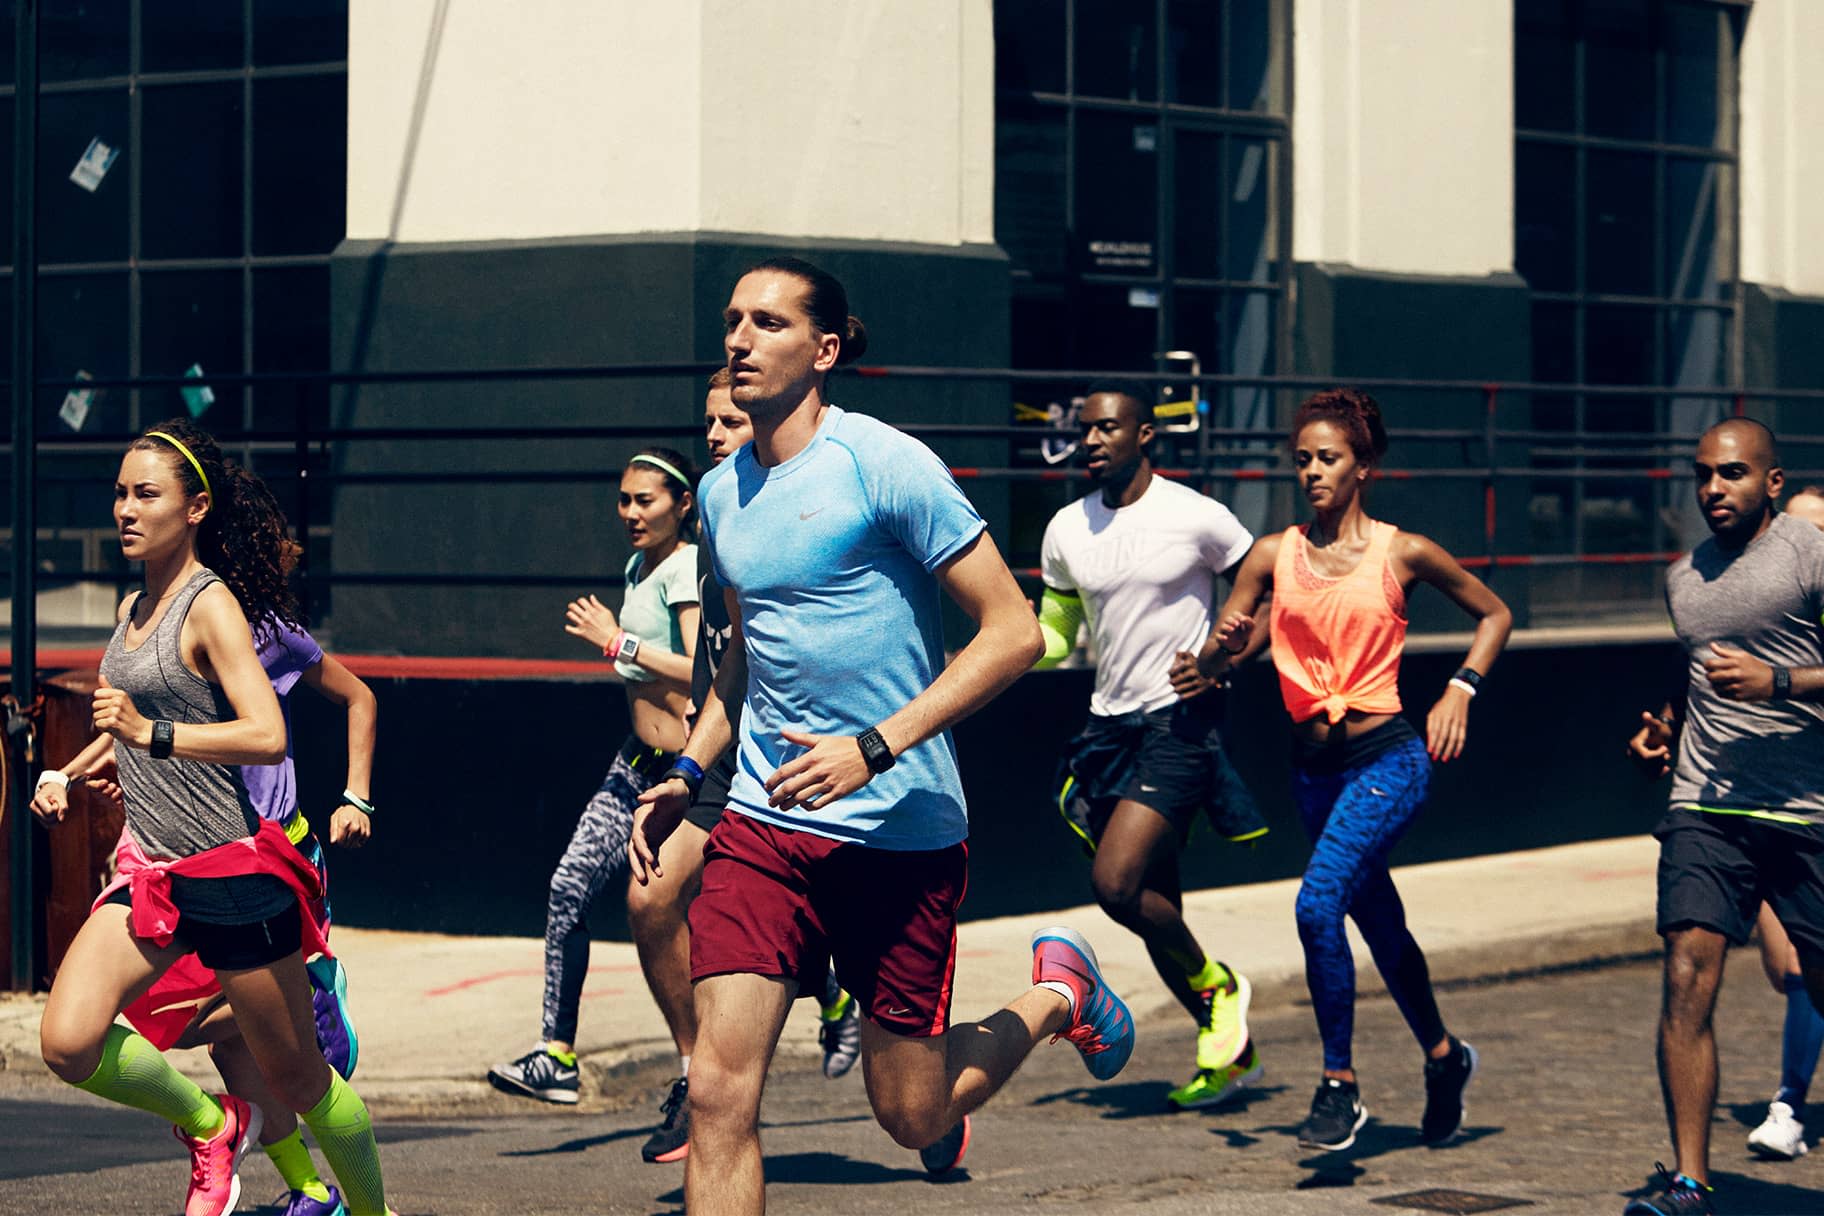 The Beginner's Guide to Start Running, According to People Who Have Done It